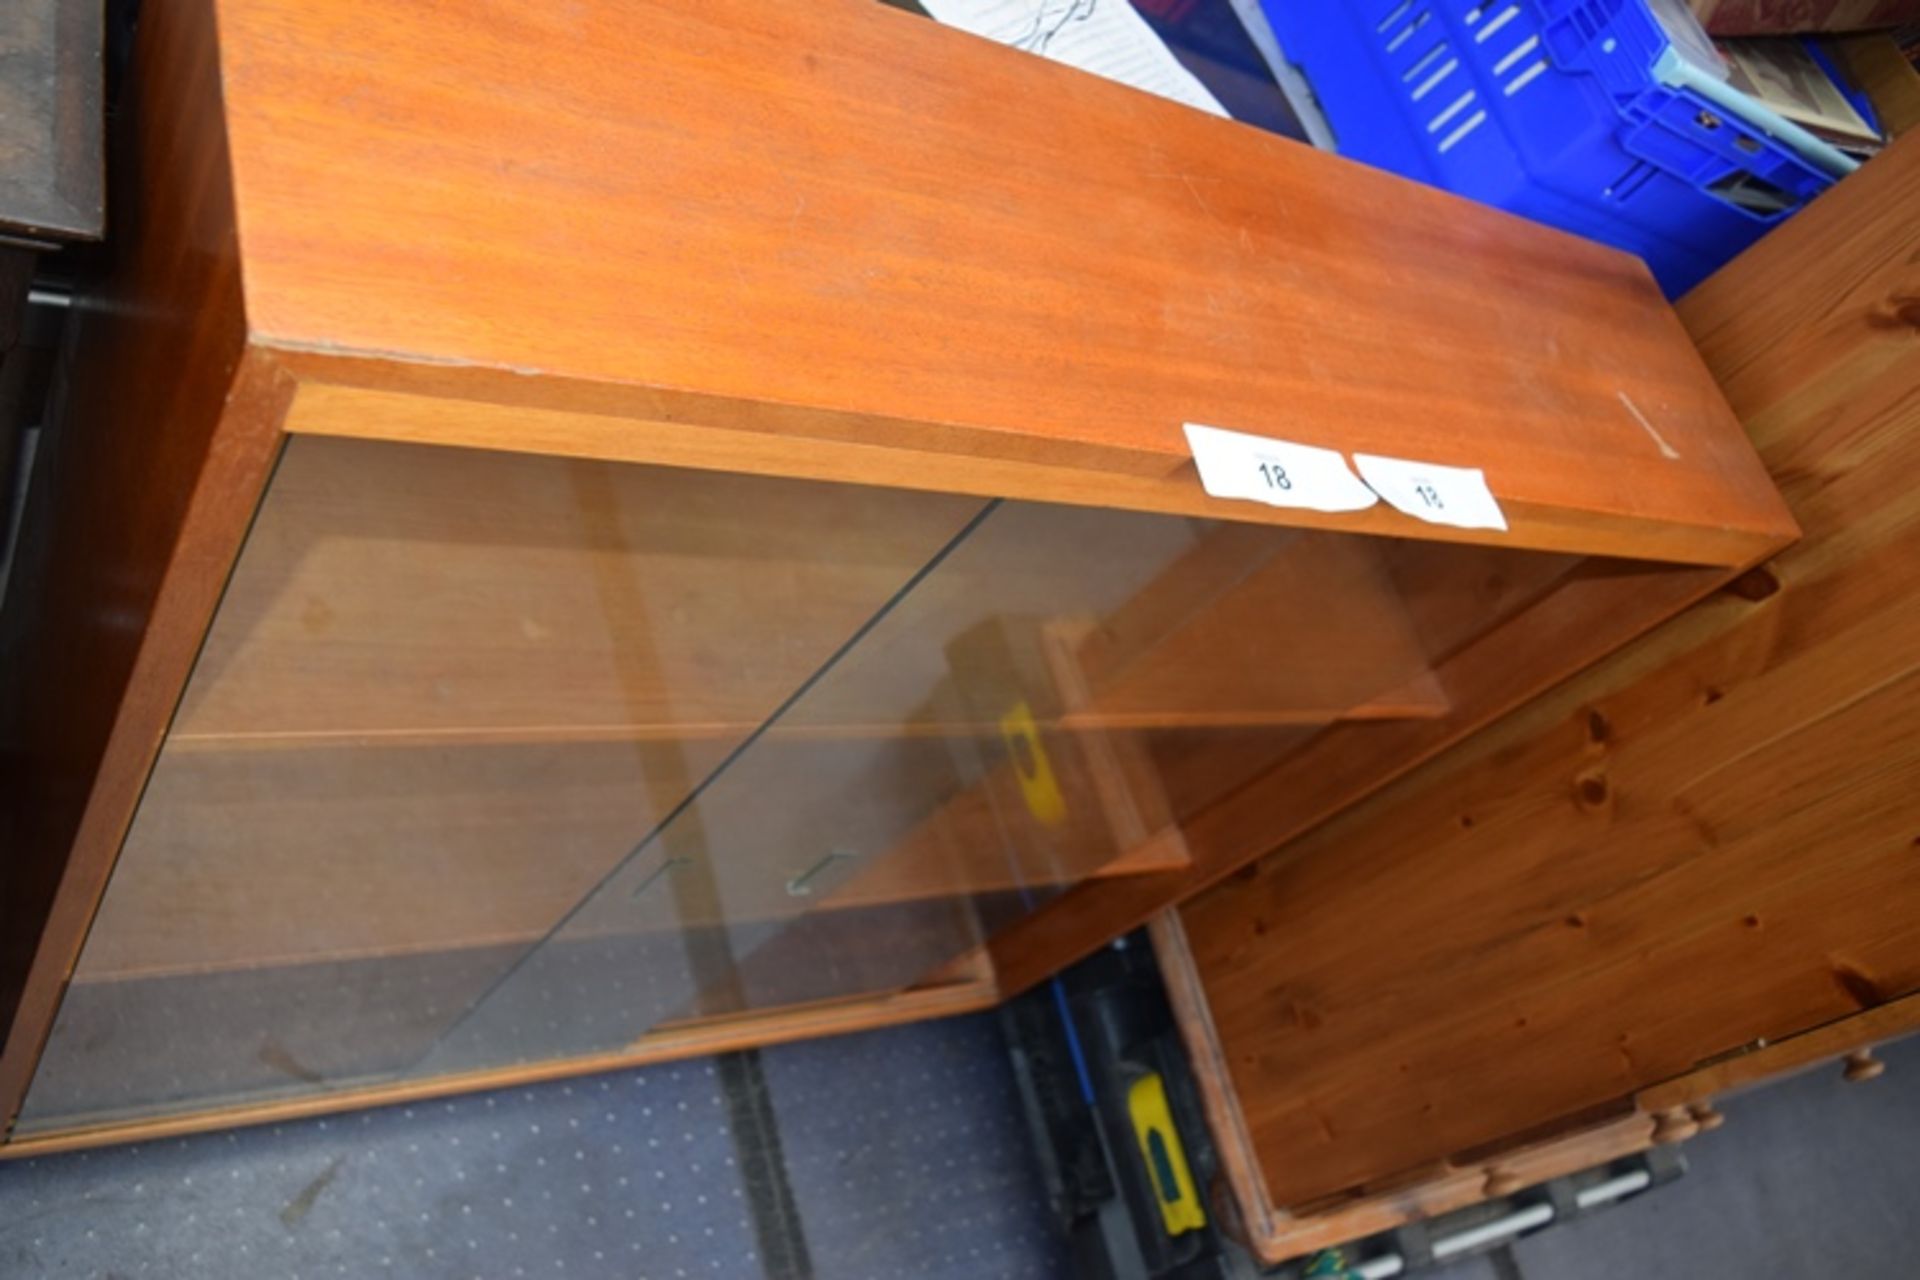 Sapele wood, glass fronted bookcase, 36"(W) x 9"(D) x 38"(H) - Second-hand (FS)